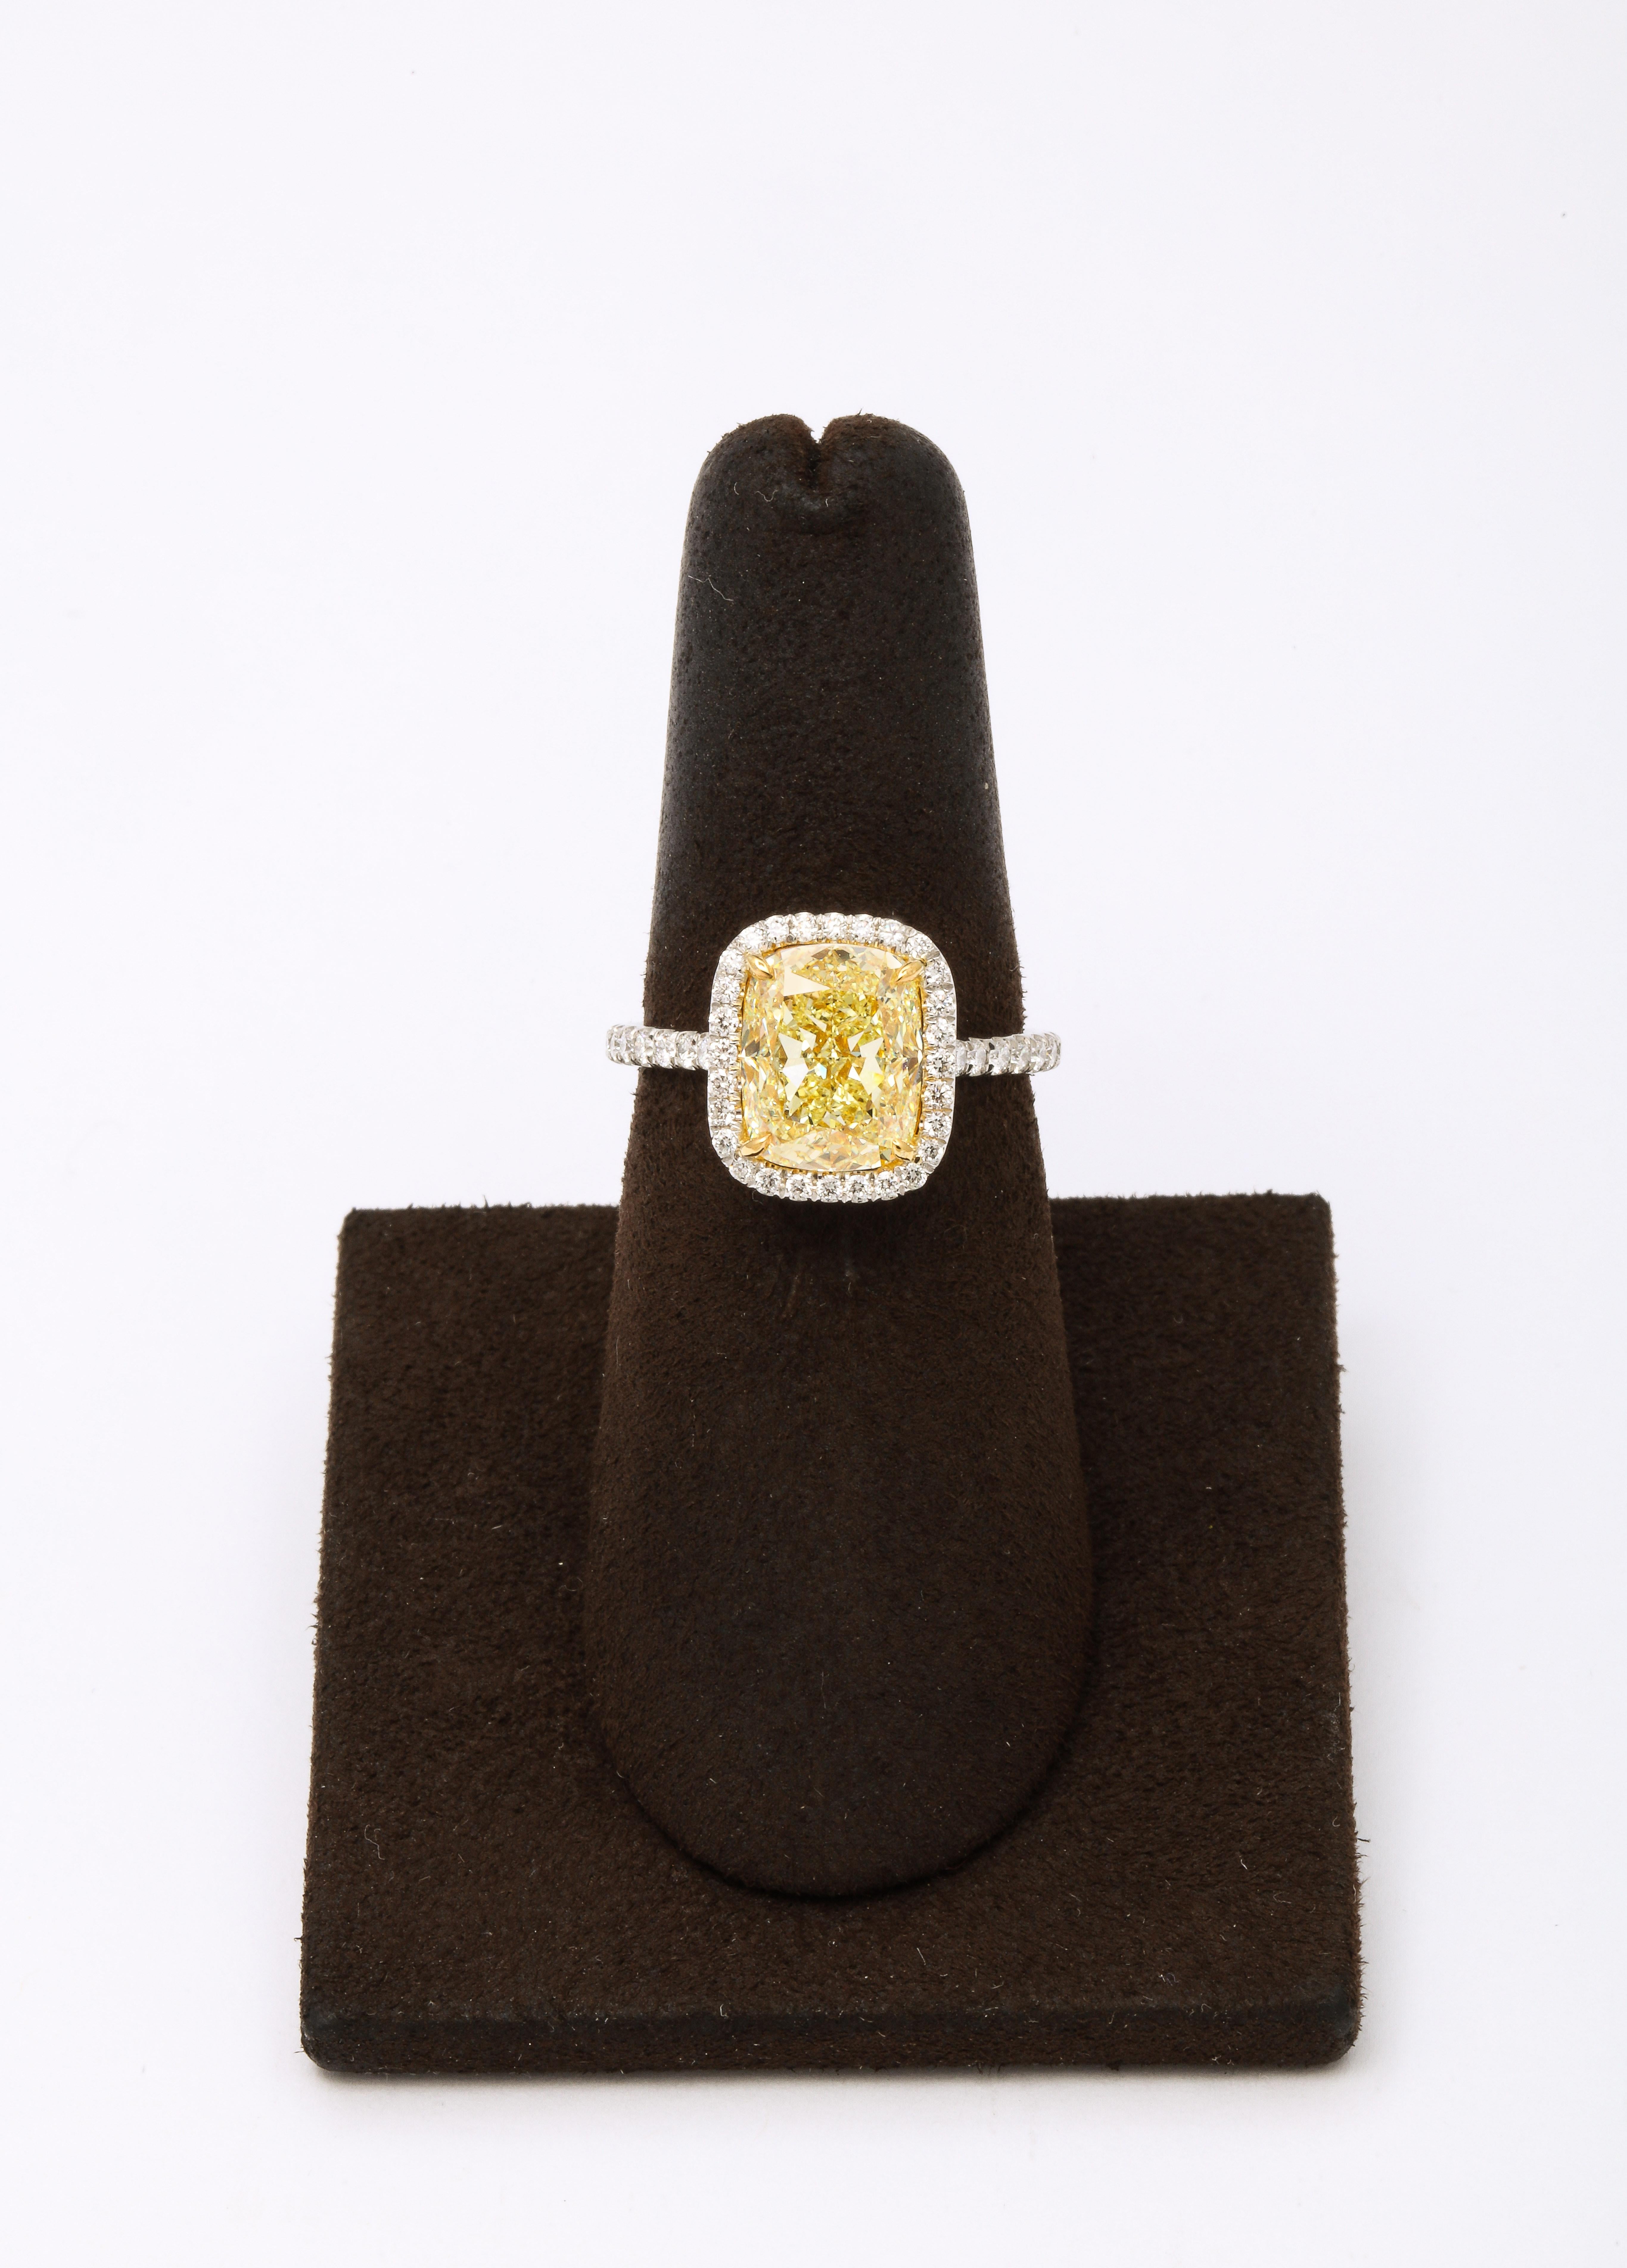 
A beautiful cushion cut! 

3.51 carat GIA Certified Fancy Yellow, VS1 center diamond. 

Set in a custom platinum mounting with .50 carats of colorless white round brilliant cut diamonds. 

A beautiful and vibrant center diamond with strong Fancy